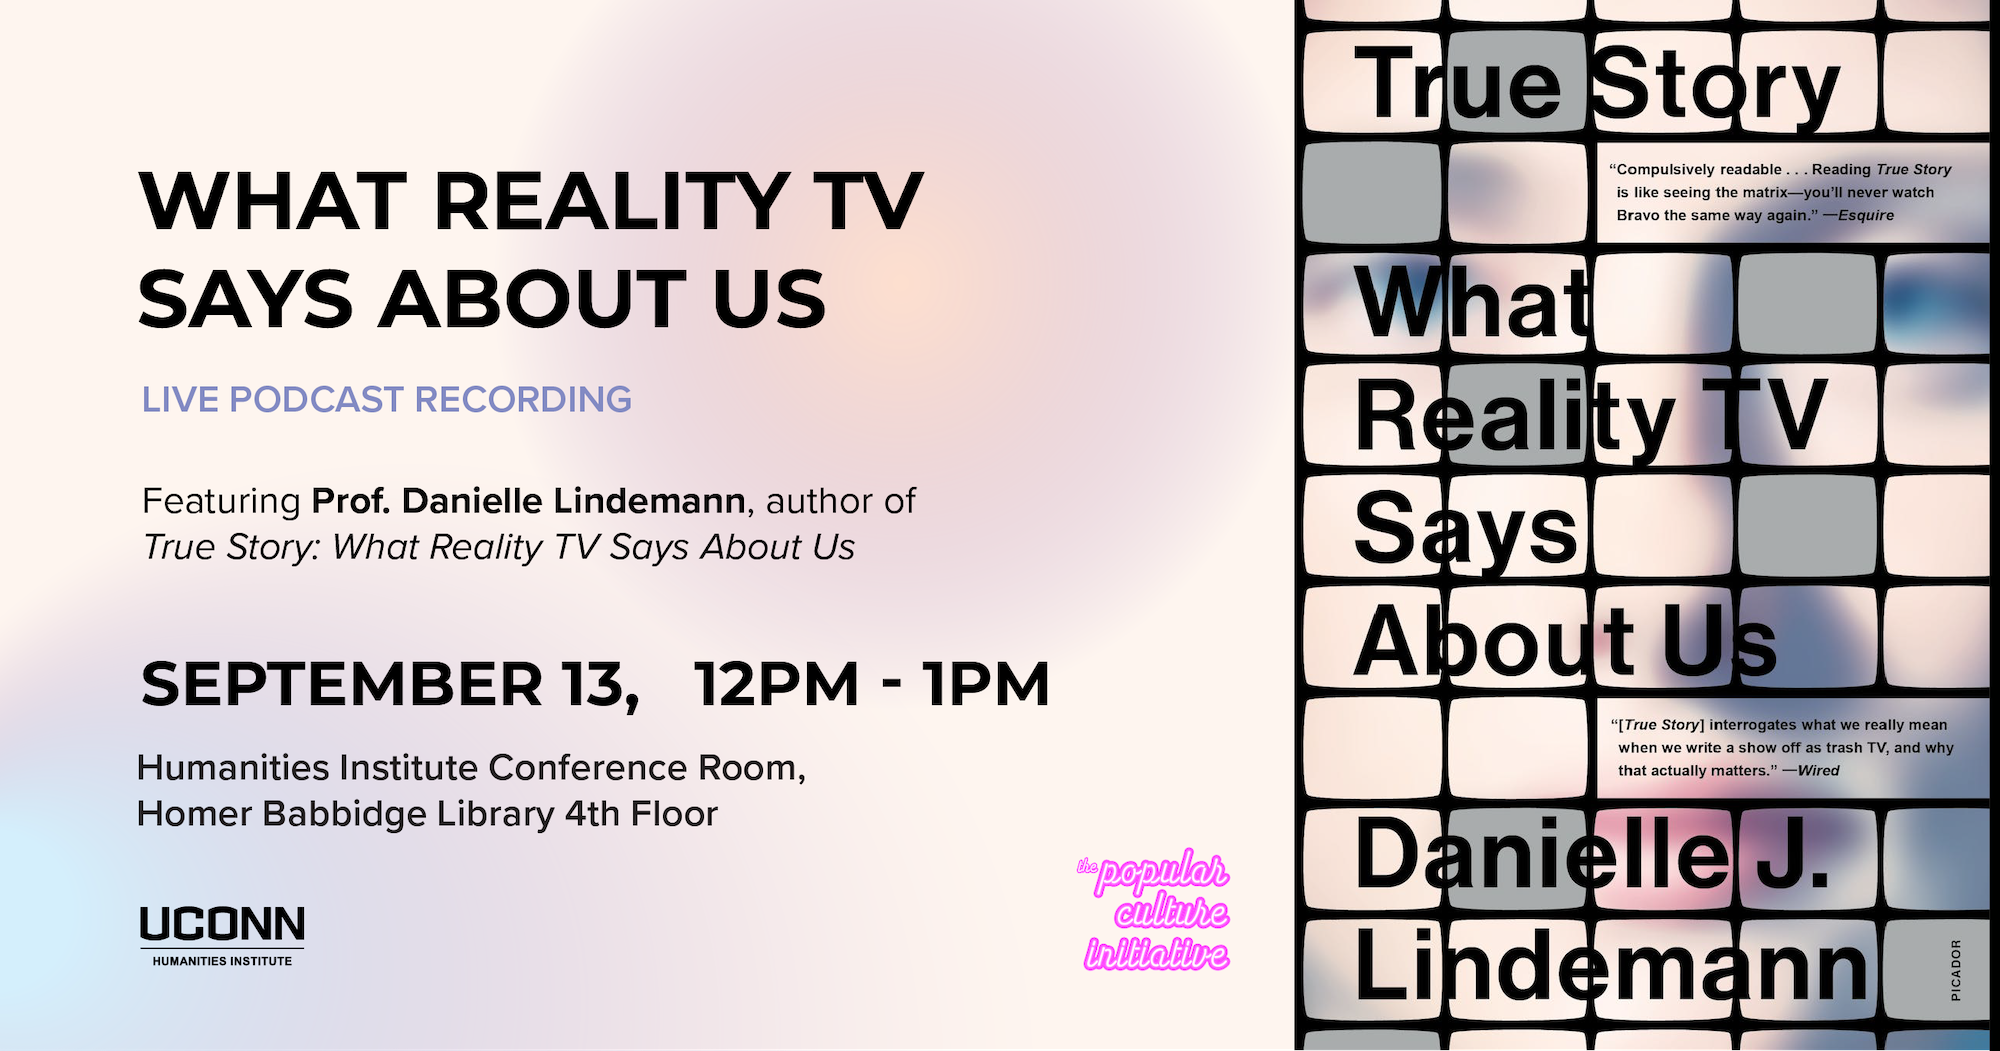 What Reality TV Says About US: A Live Podcast Recording. Featuring Prof Danielle Lindemann, author of "True Story: What Reality TV Says About Us." September 13, 12–1pm, UCHI Conference Room, Homer Babbidge Library, Fourth Floor.